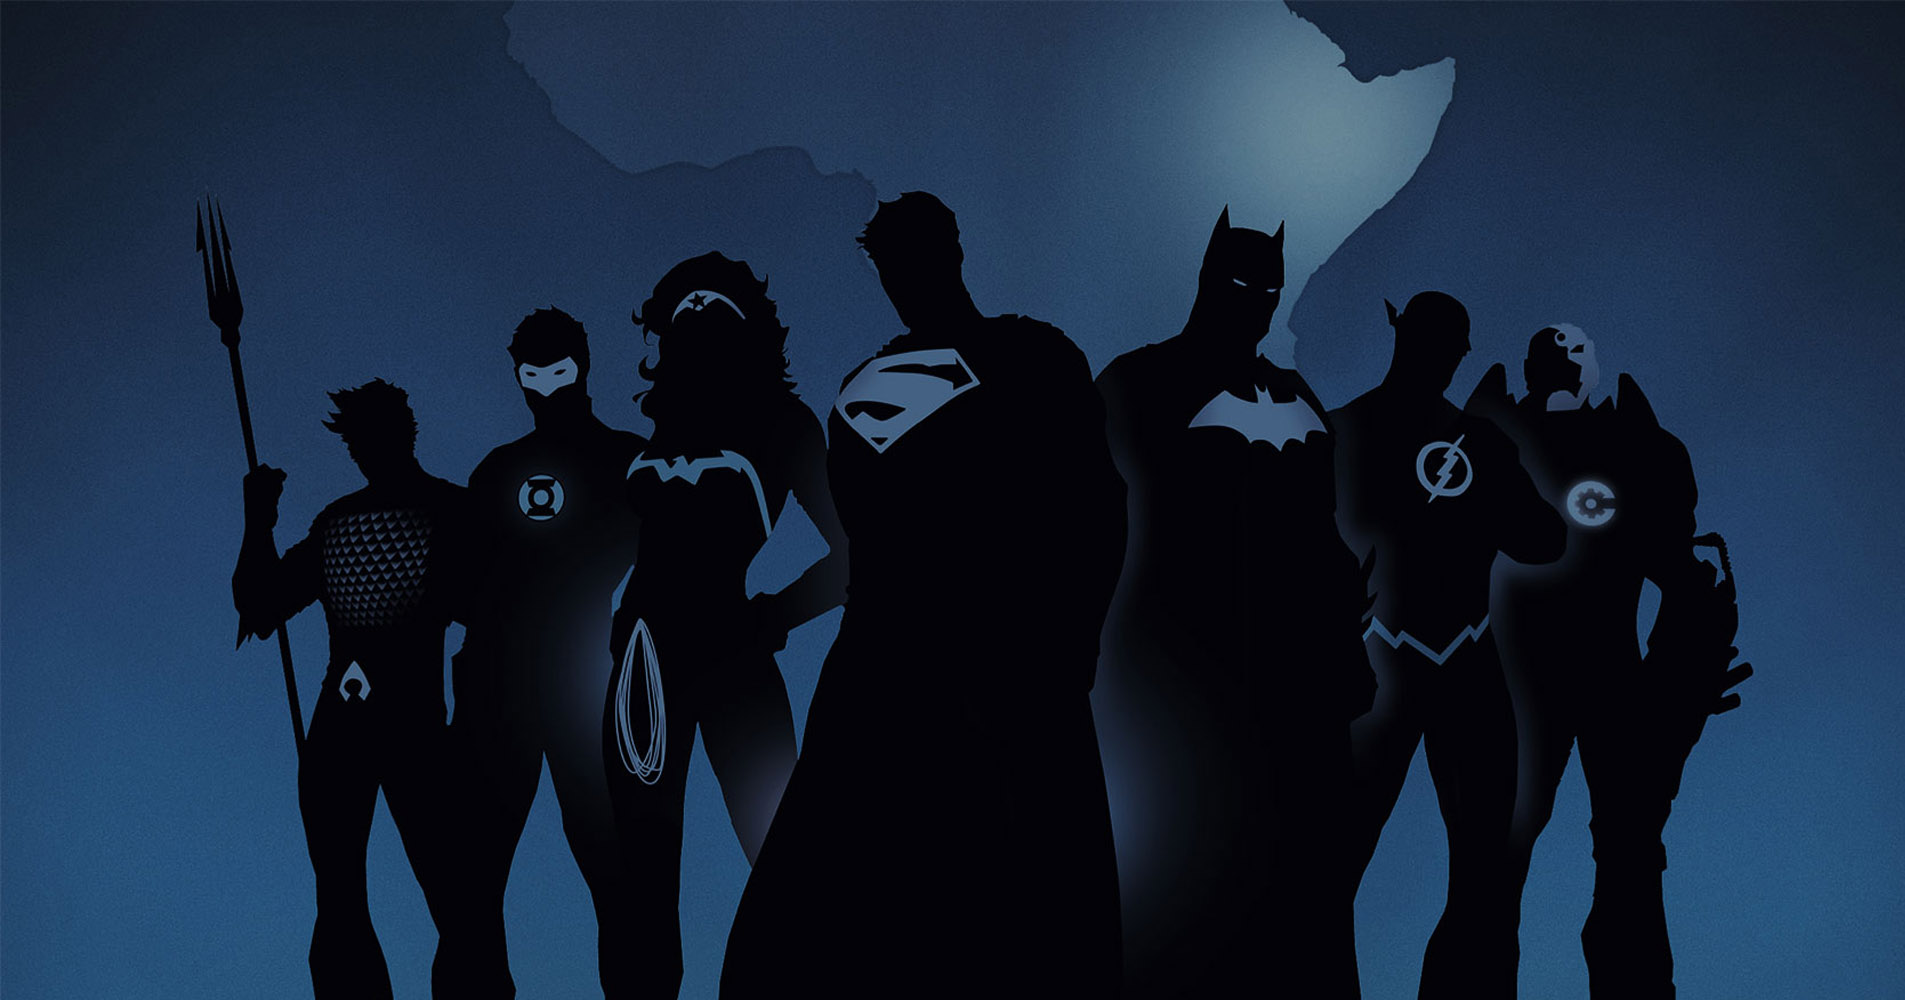 We Can Be Heroes, a global $2 million fundraising campaign DC Comics.